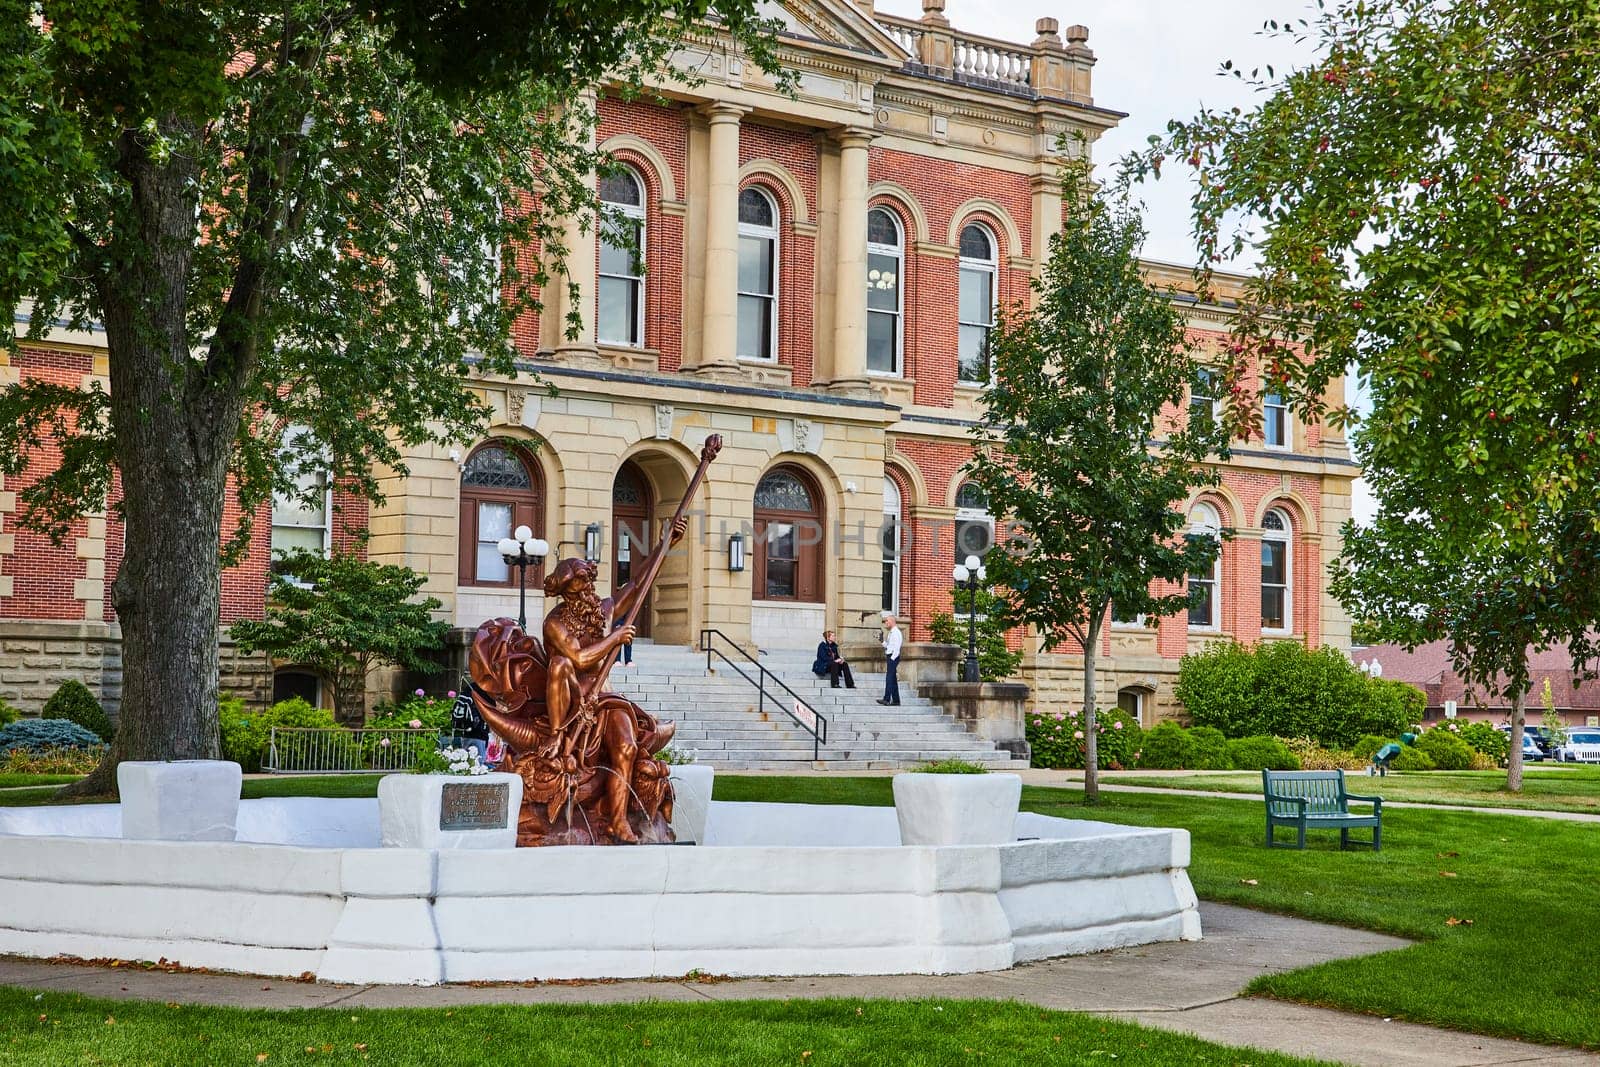 Image of Elkhart County courthouse with bronze statue of Poseidon out front on summer day, law and order